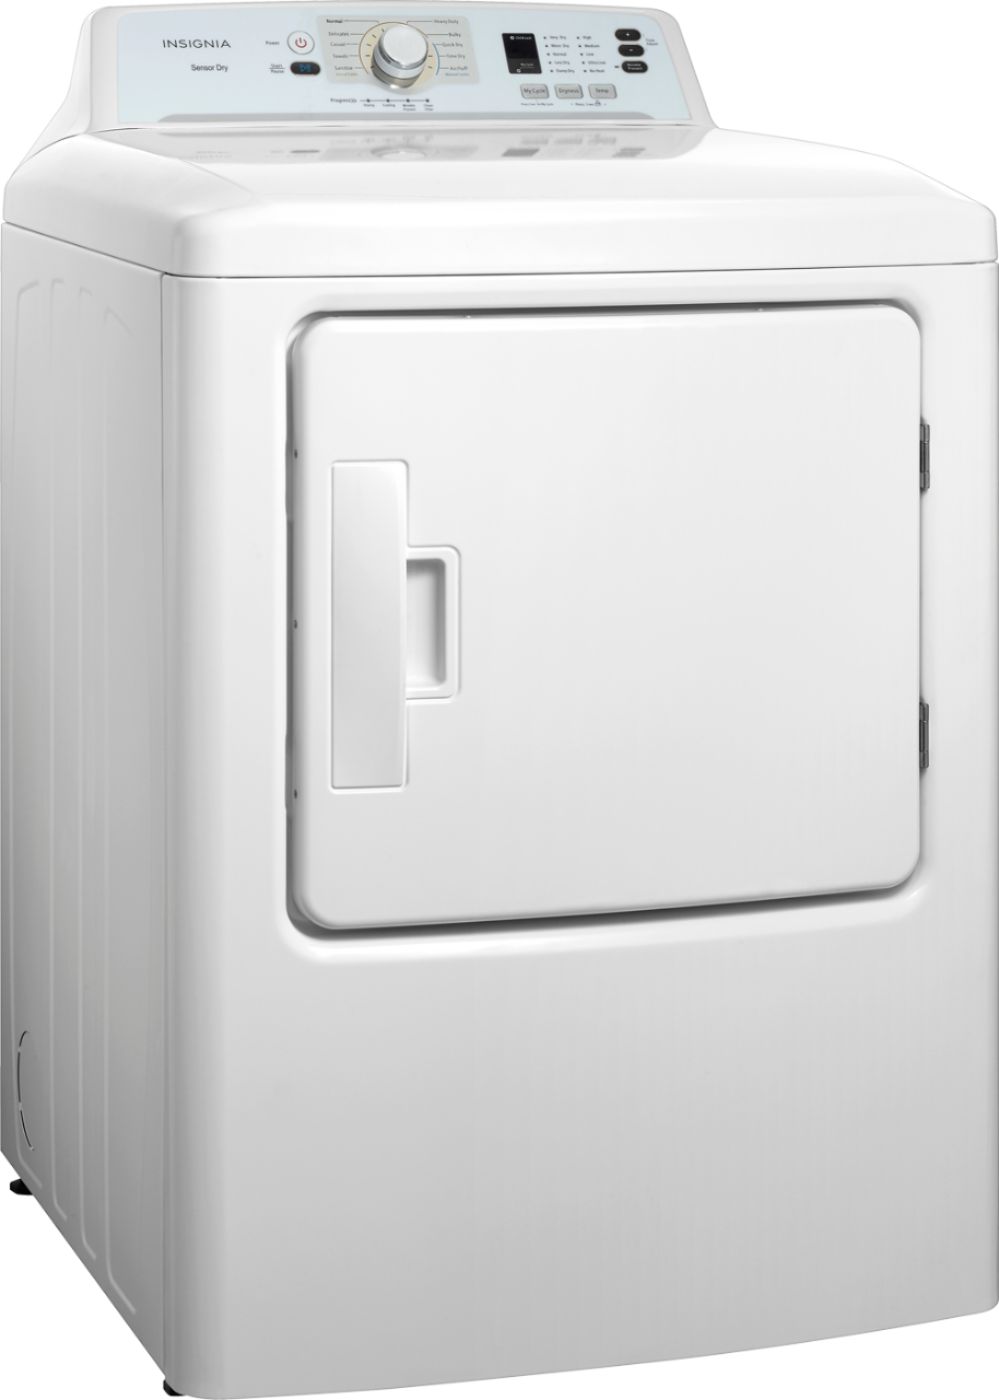 Angle View: Insignia™ - 6.7 Cu. Ft. Gas Dryer - White